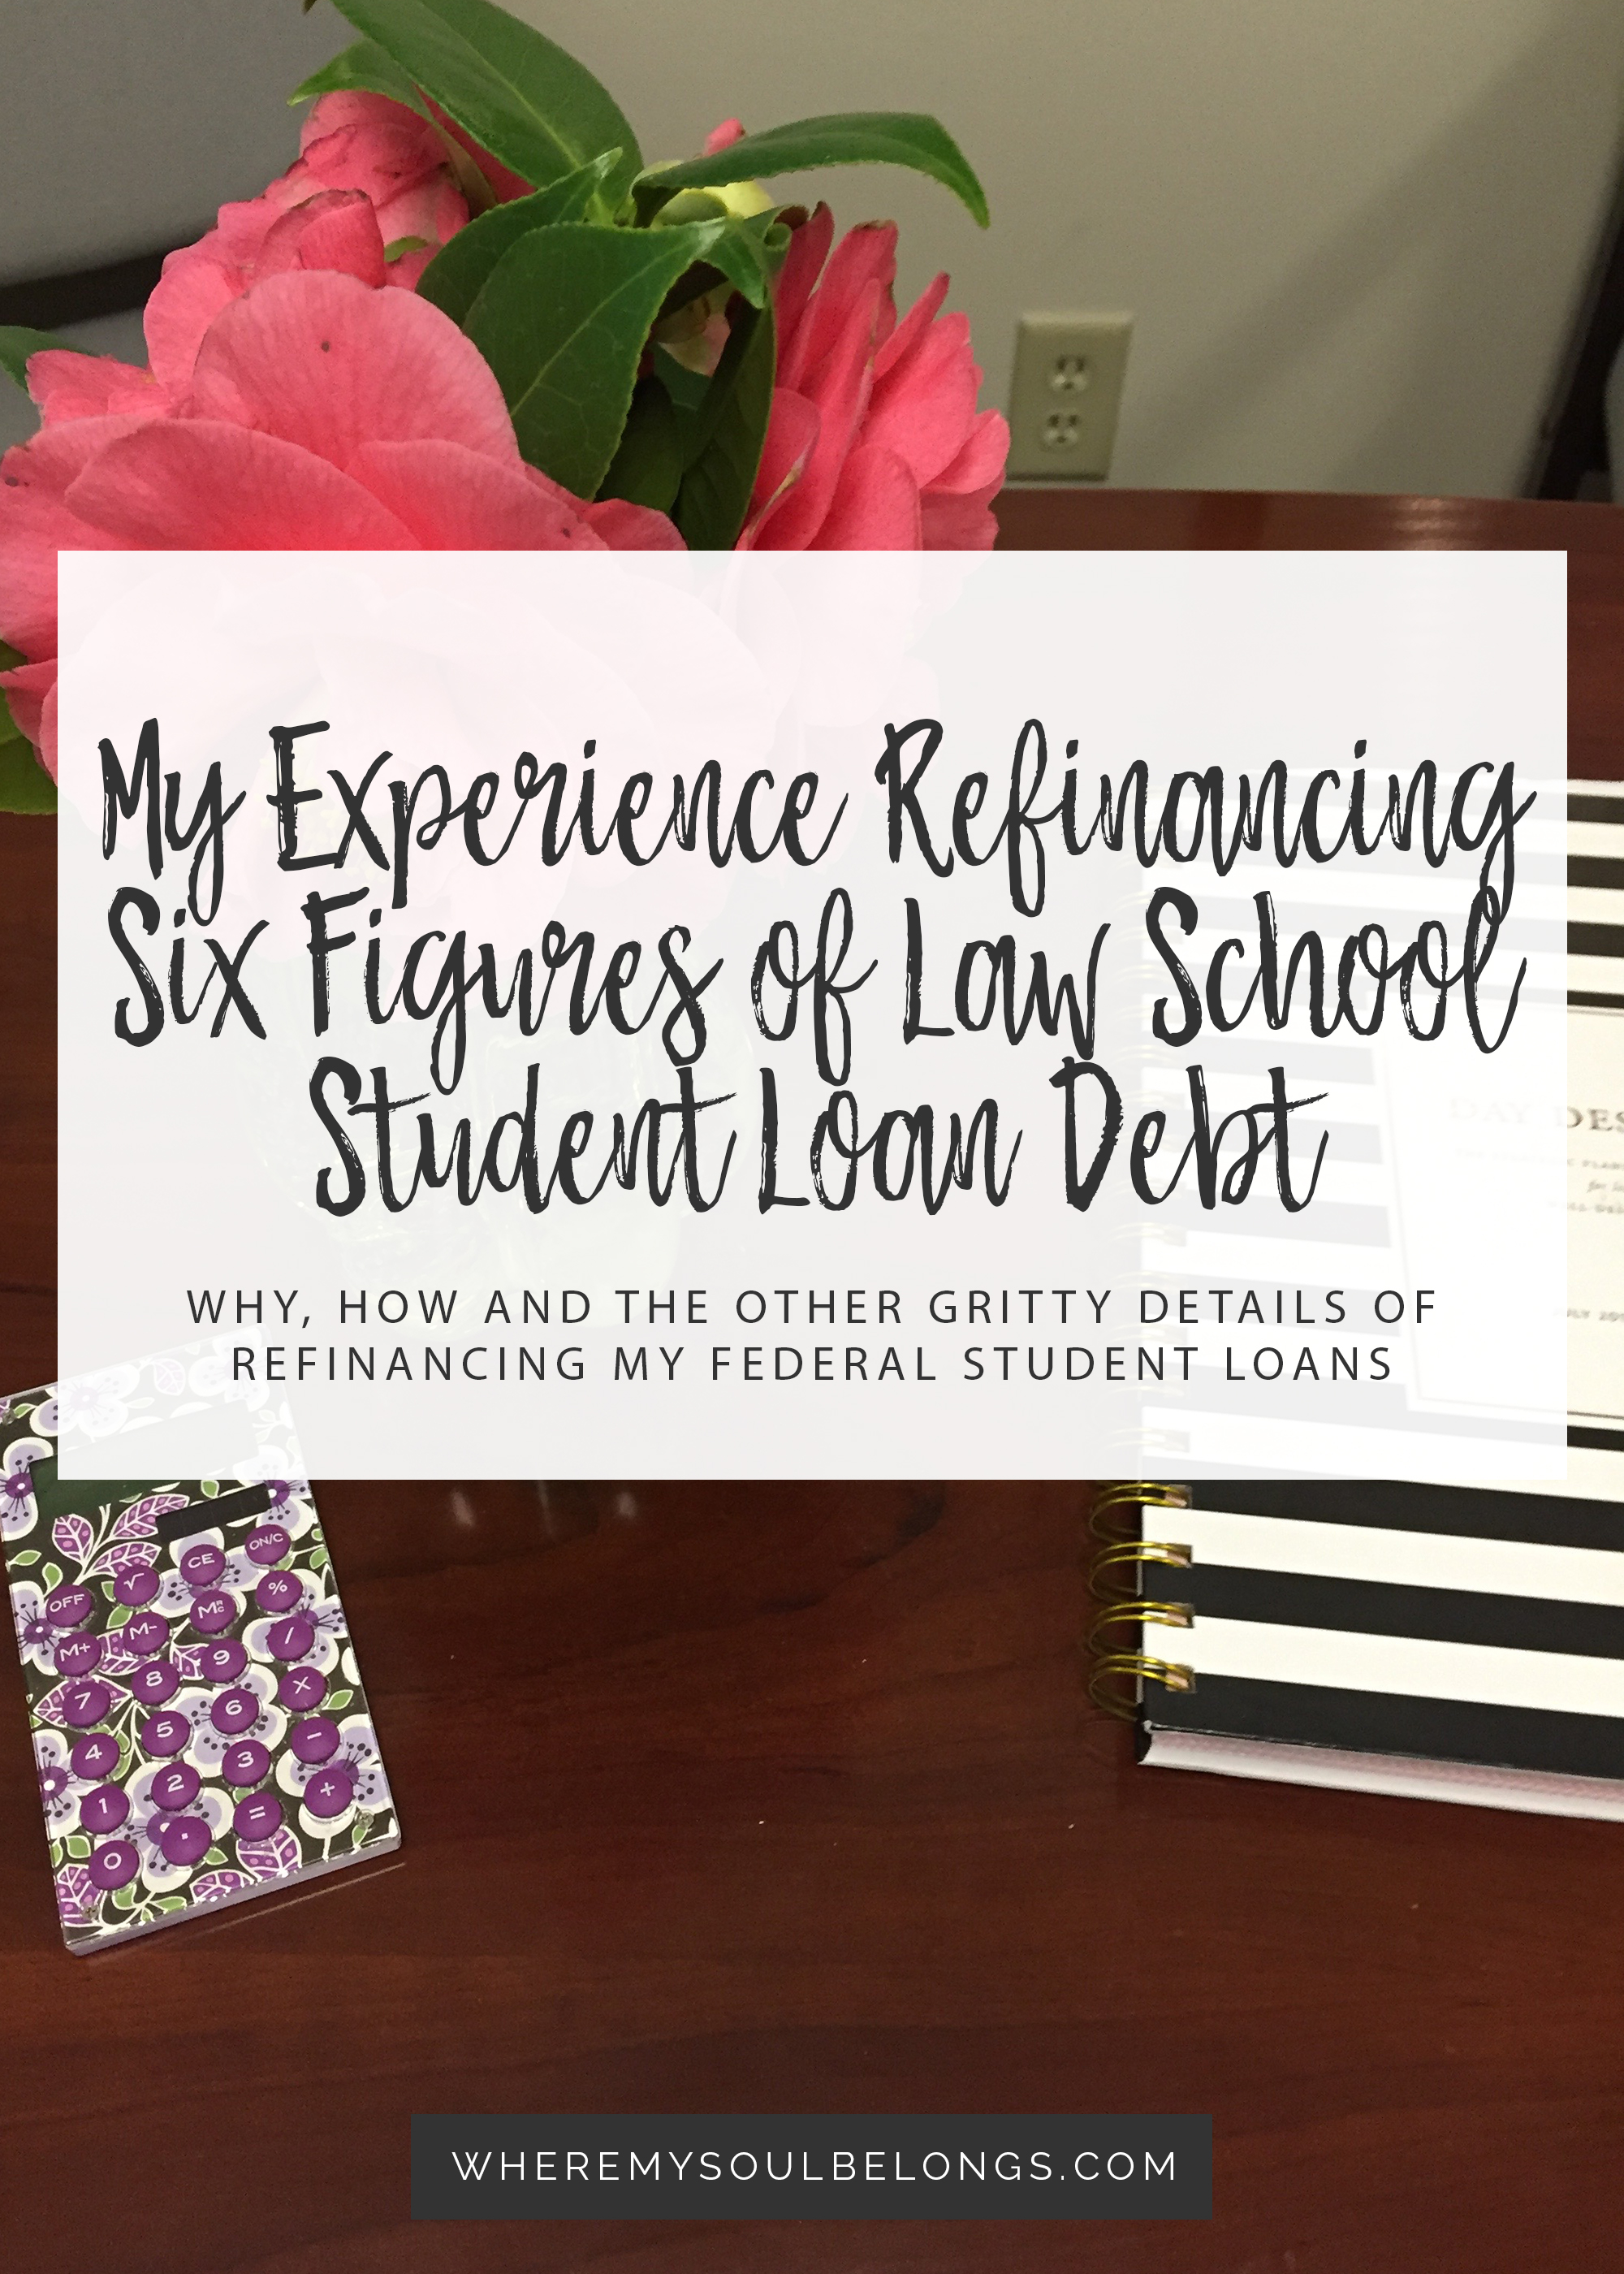 How To Fill Out Consolidated Student Loan Agreement And Repayment Form